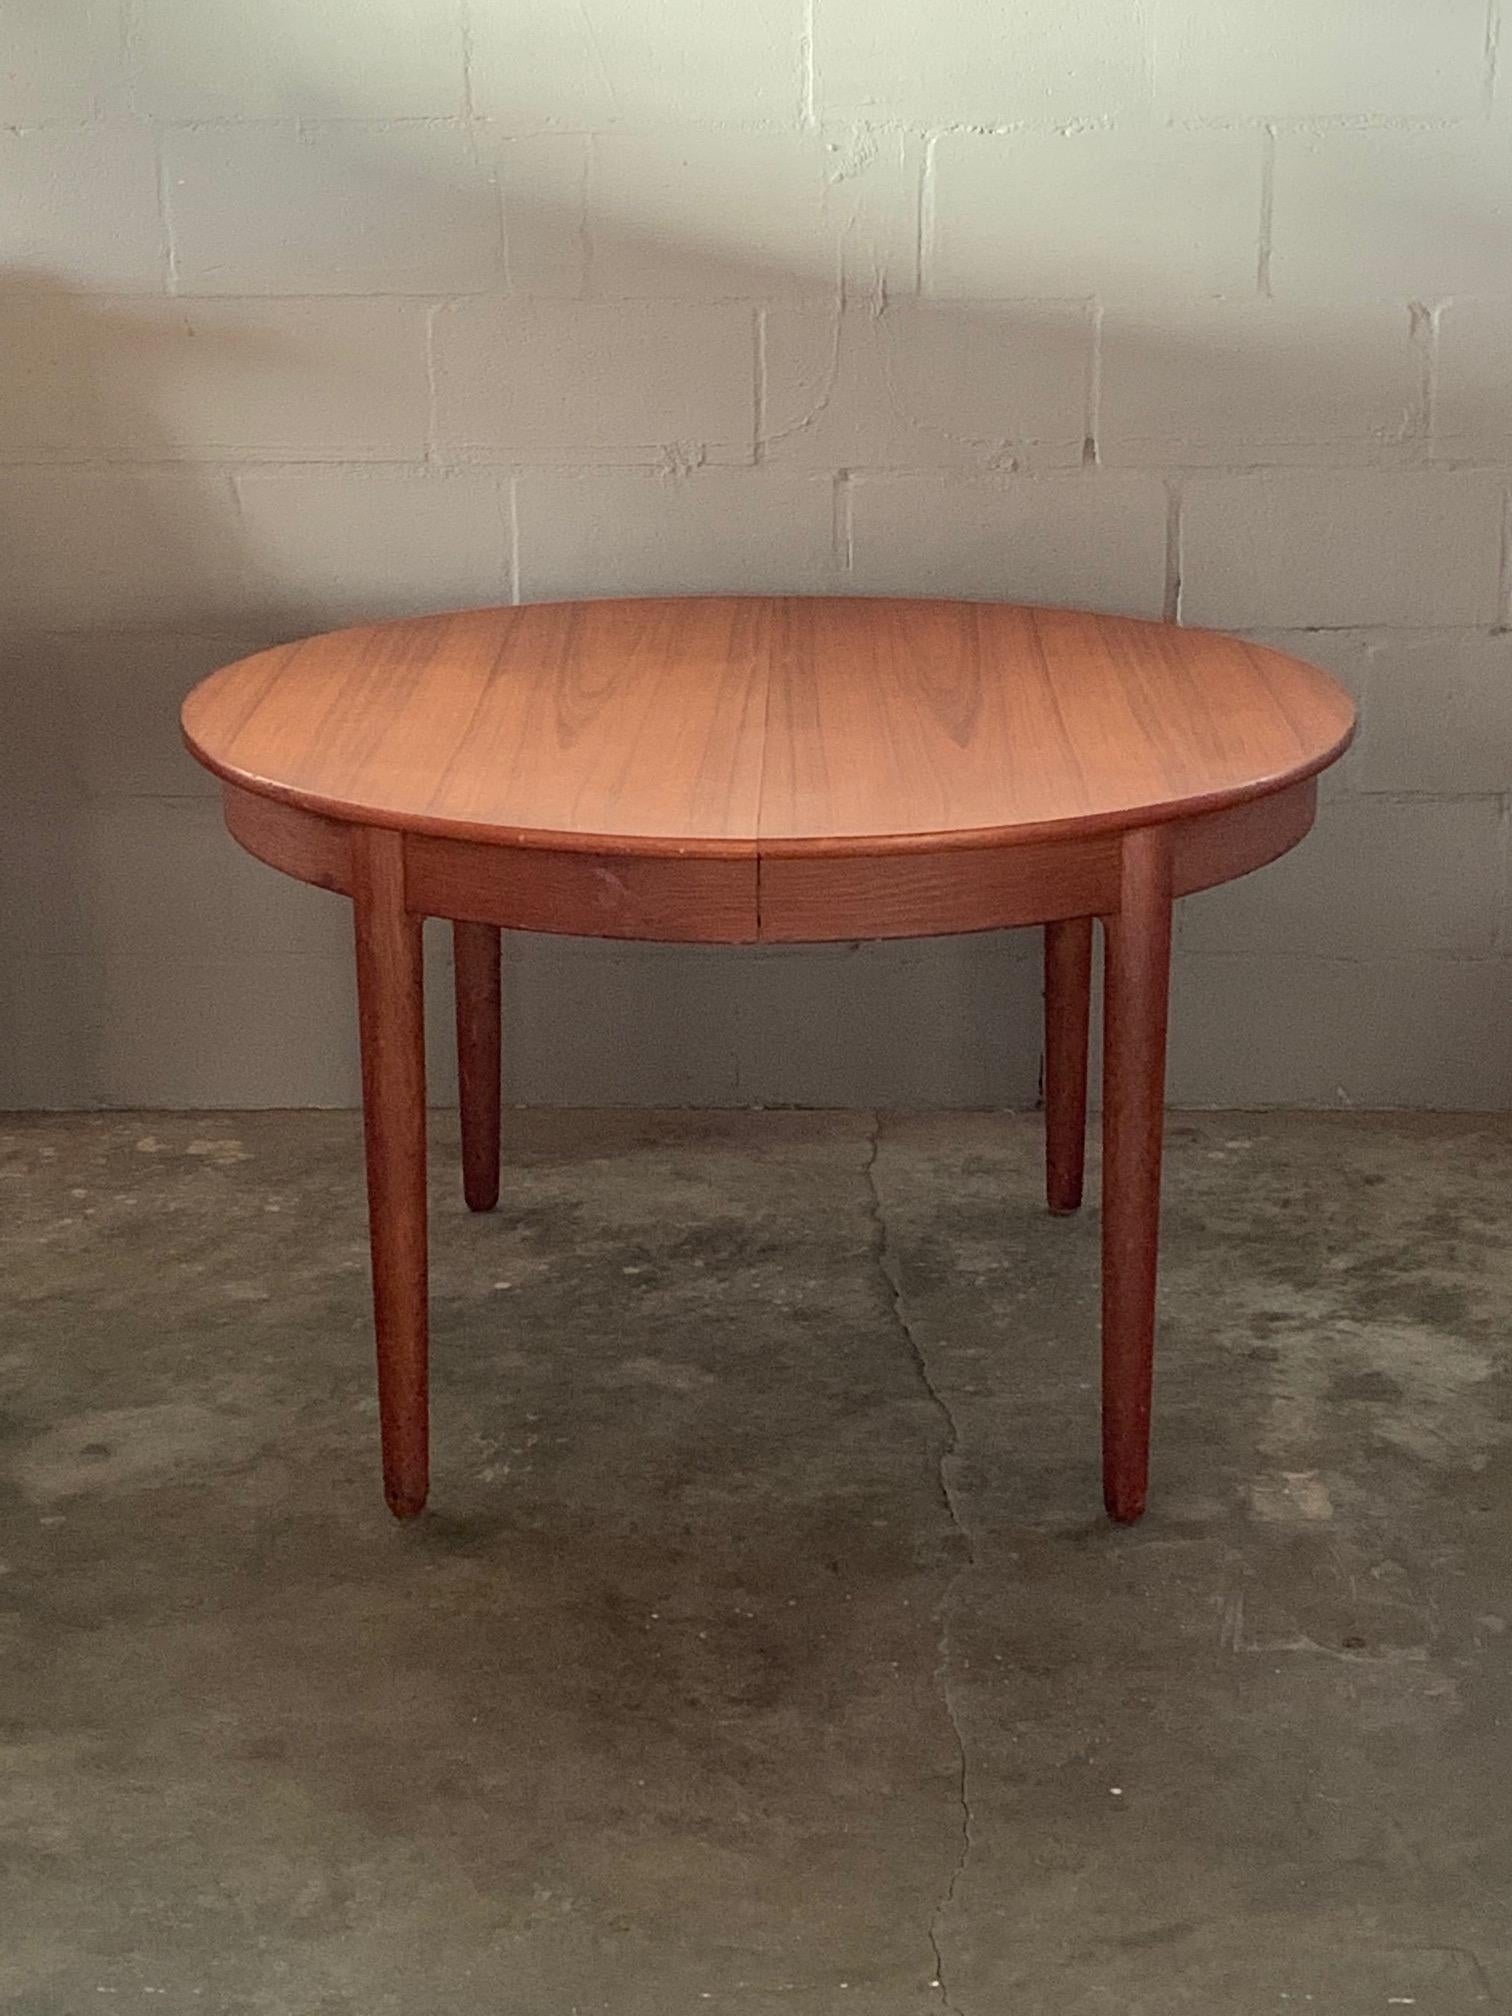 A Classic teak round dining table by Hans Wegner, manufactured by Andreas Tuck, circa 1950s. Comes with three leaves-total extention approx. 117